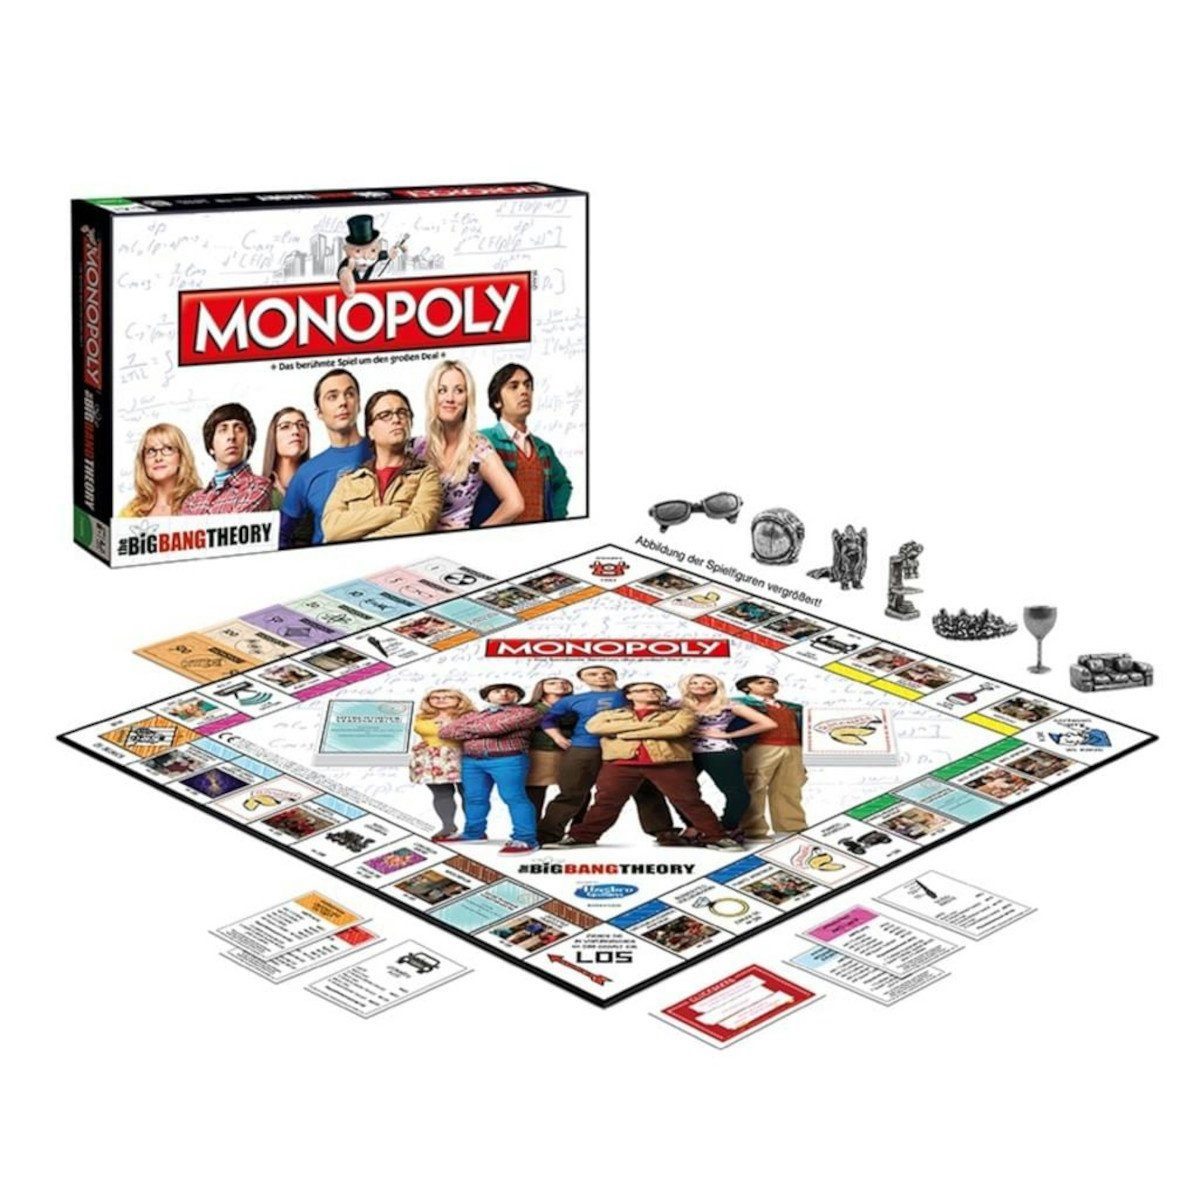 The Theory Brettspiel Moves Big Winning Spiel, Monopoly Bang